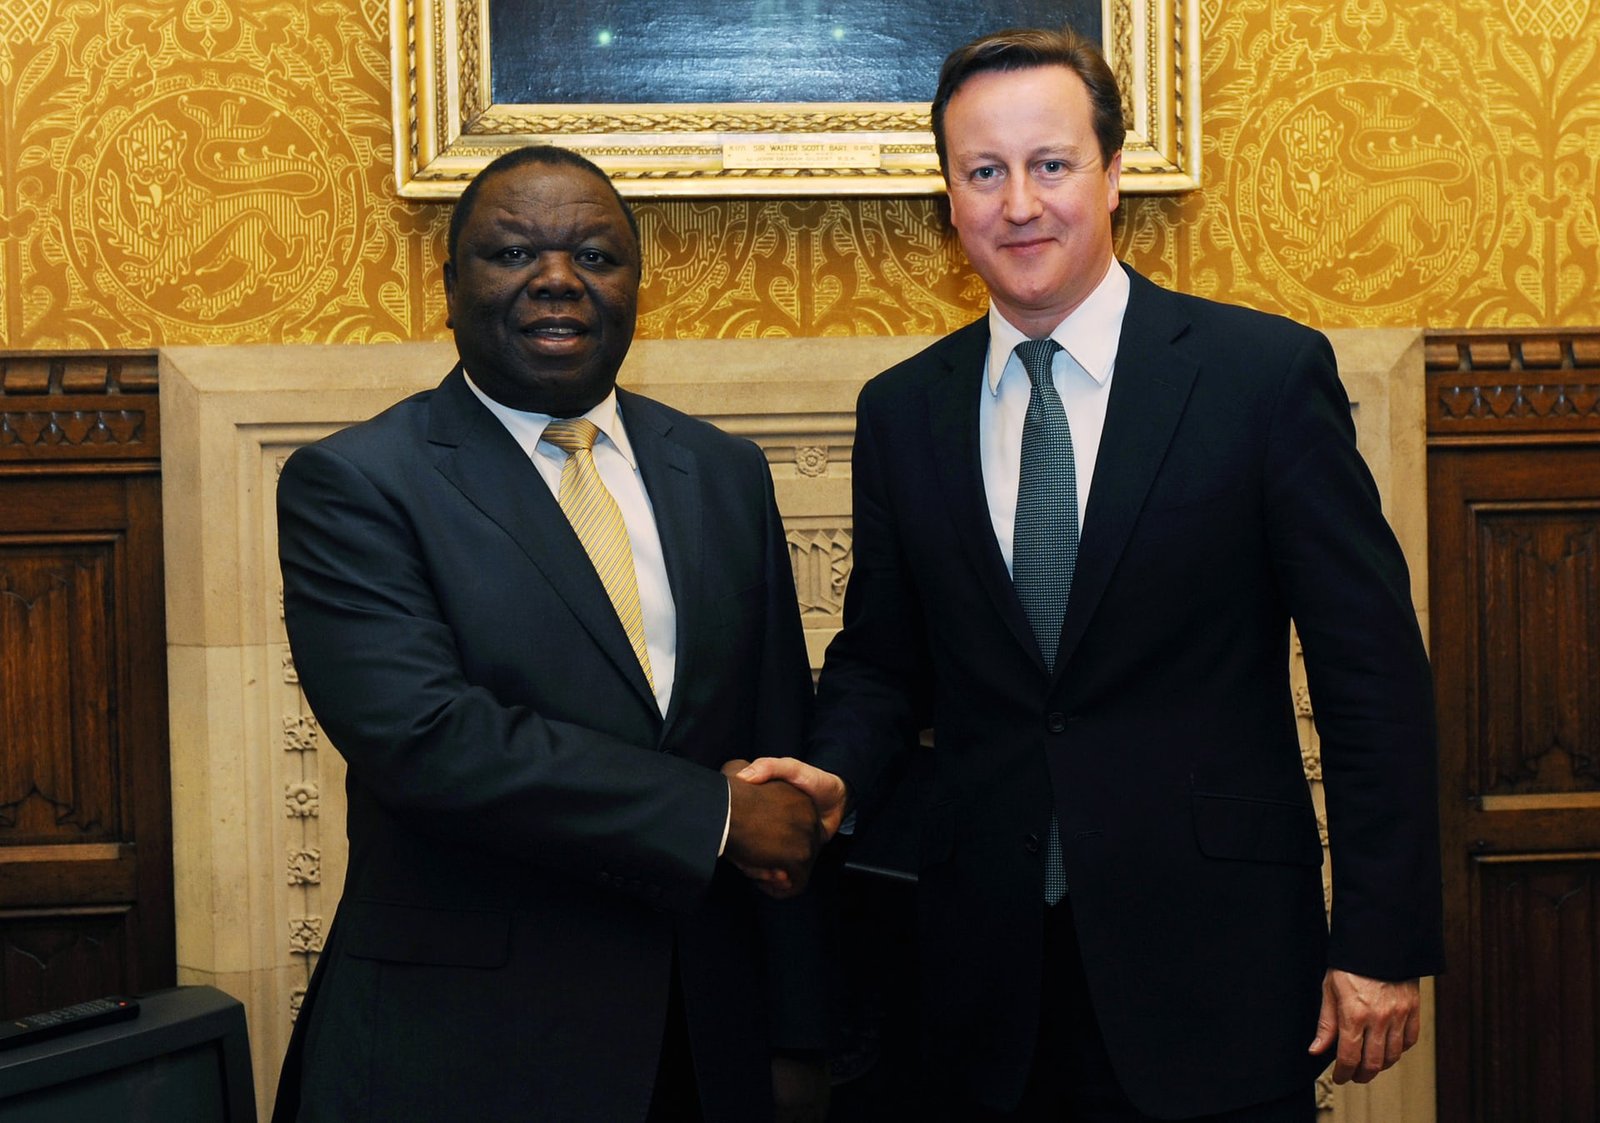 Tsvangirai meets then British prime minister David Cameron at the House of Commons in 2012.